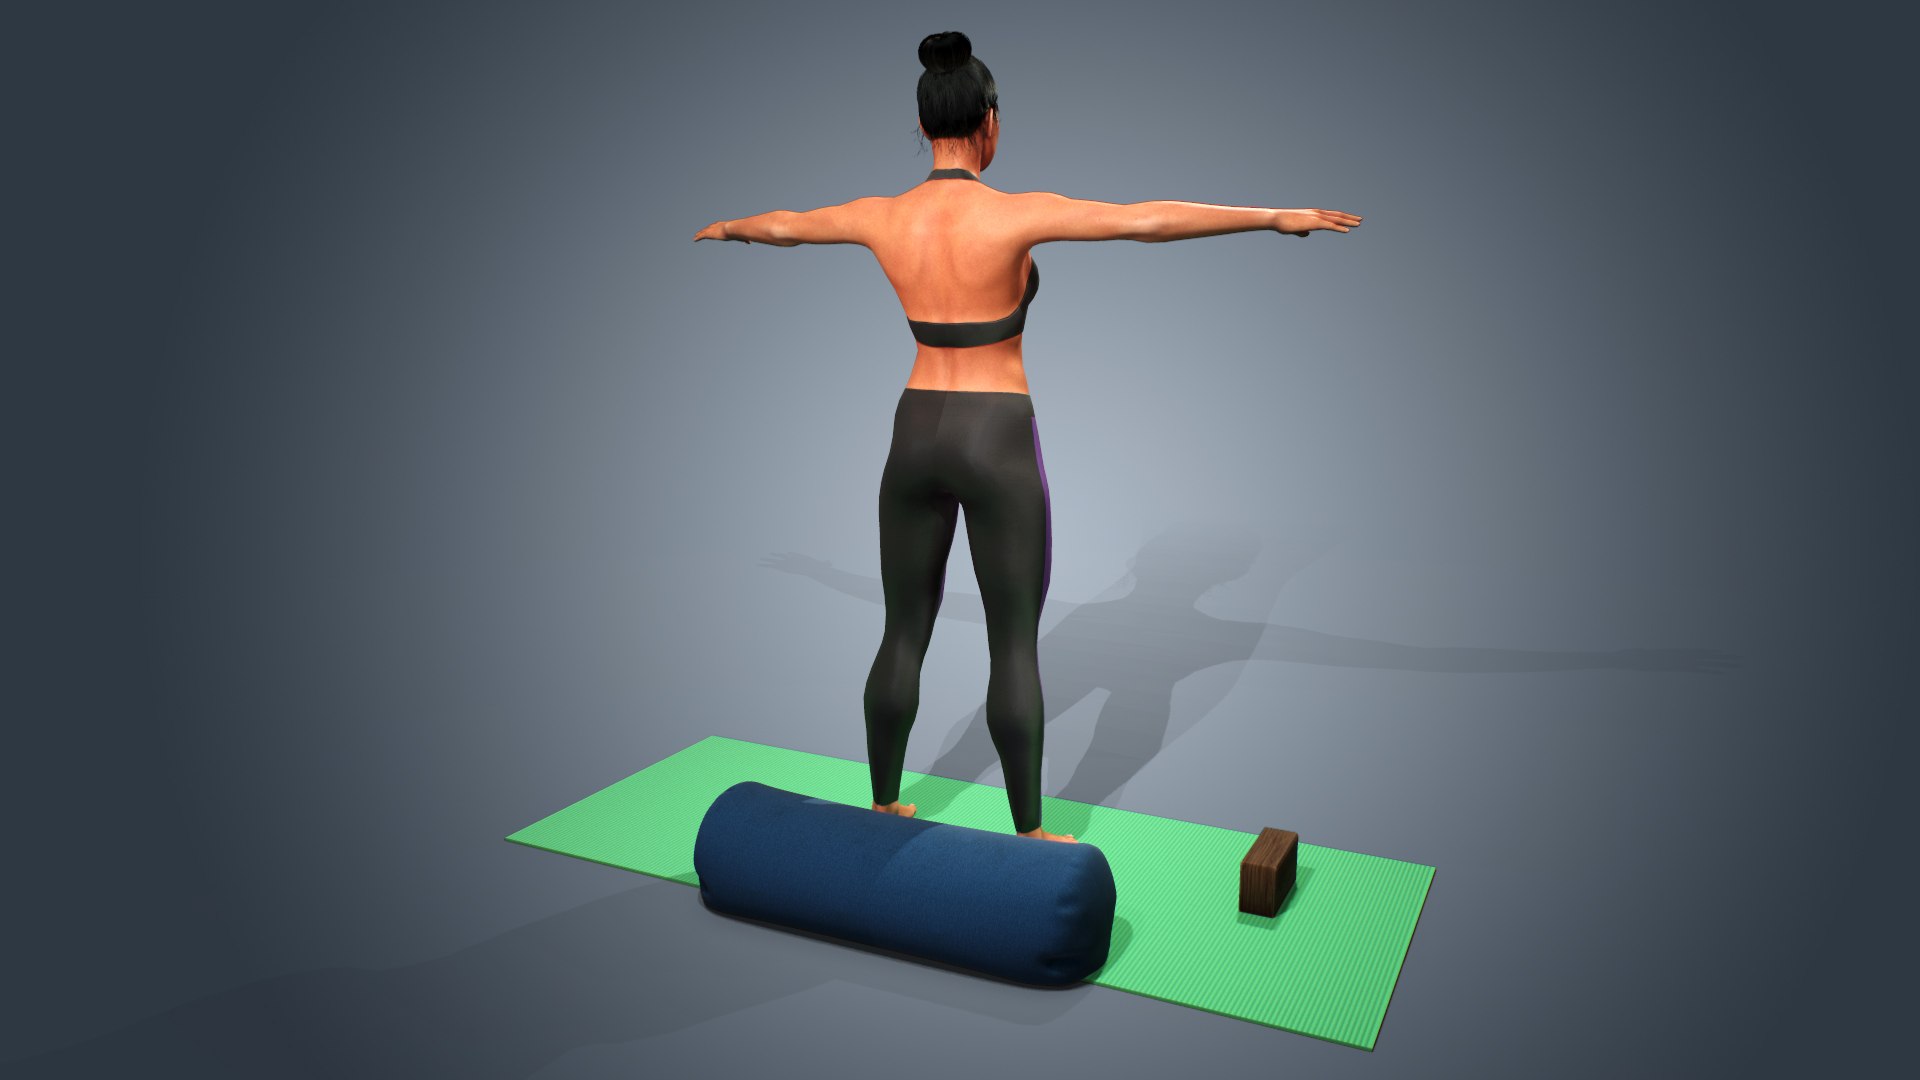 2,607 10 Yoga Poses Images, Stock Photos, 3D objects, & Vectors